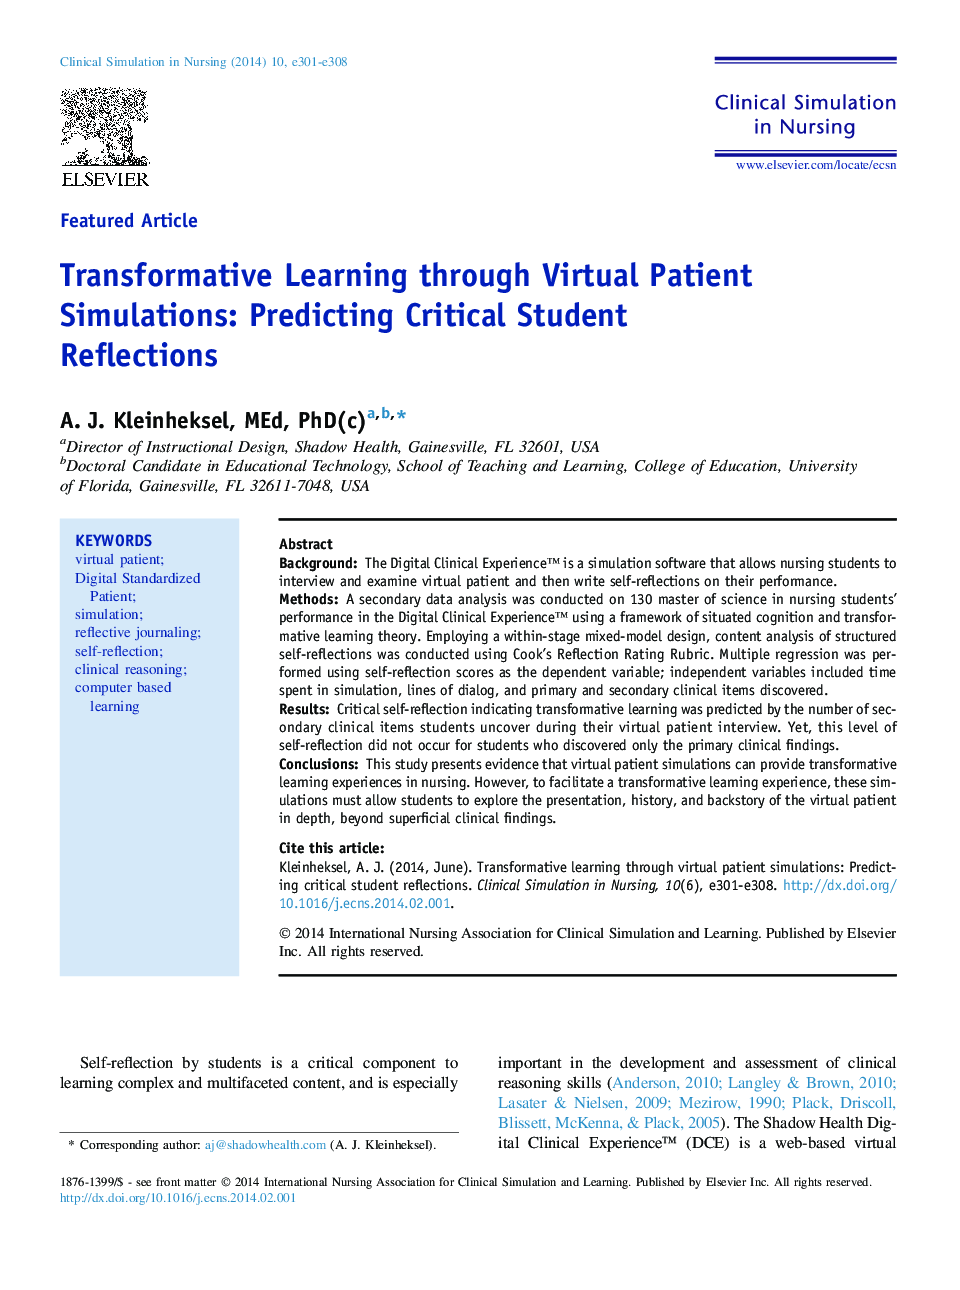 Transformative Learning through Virtual Patient Simulations: Predicting Critical Student Reflections